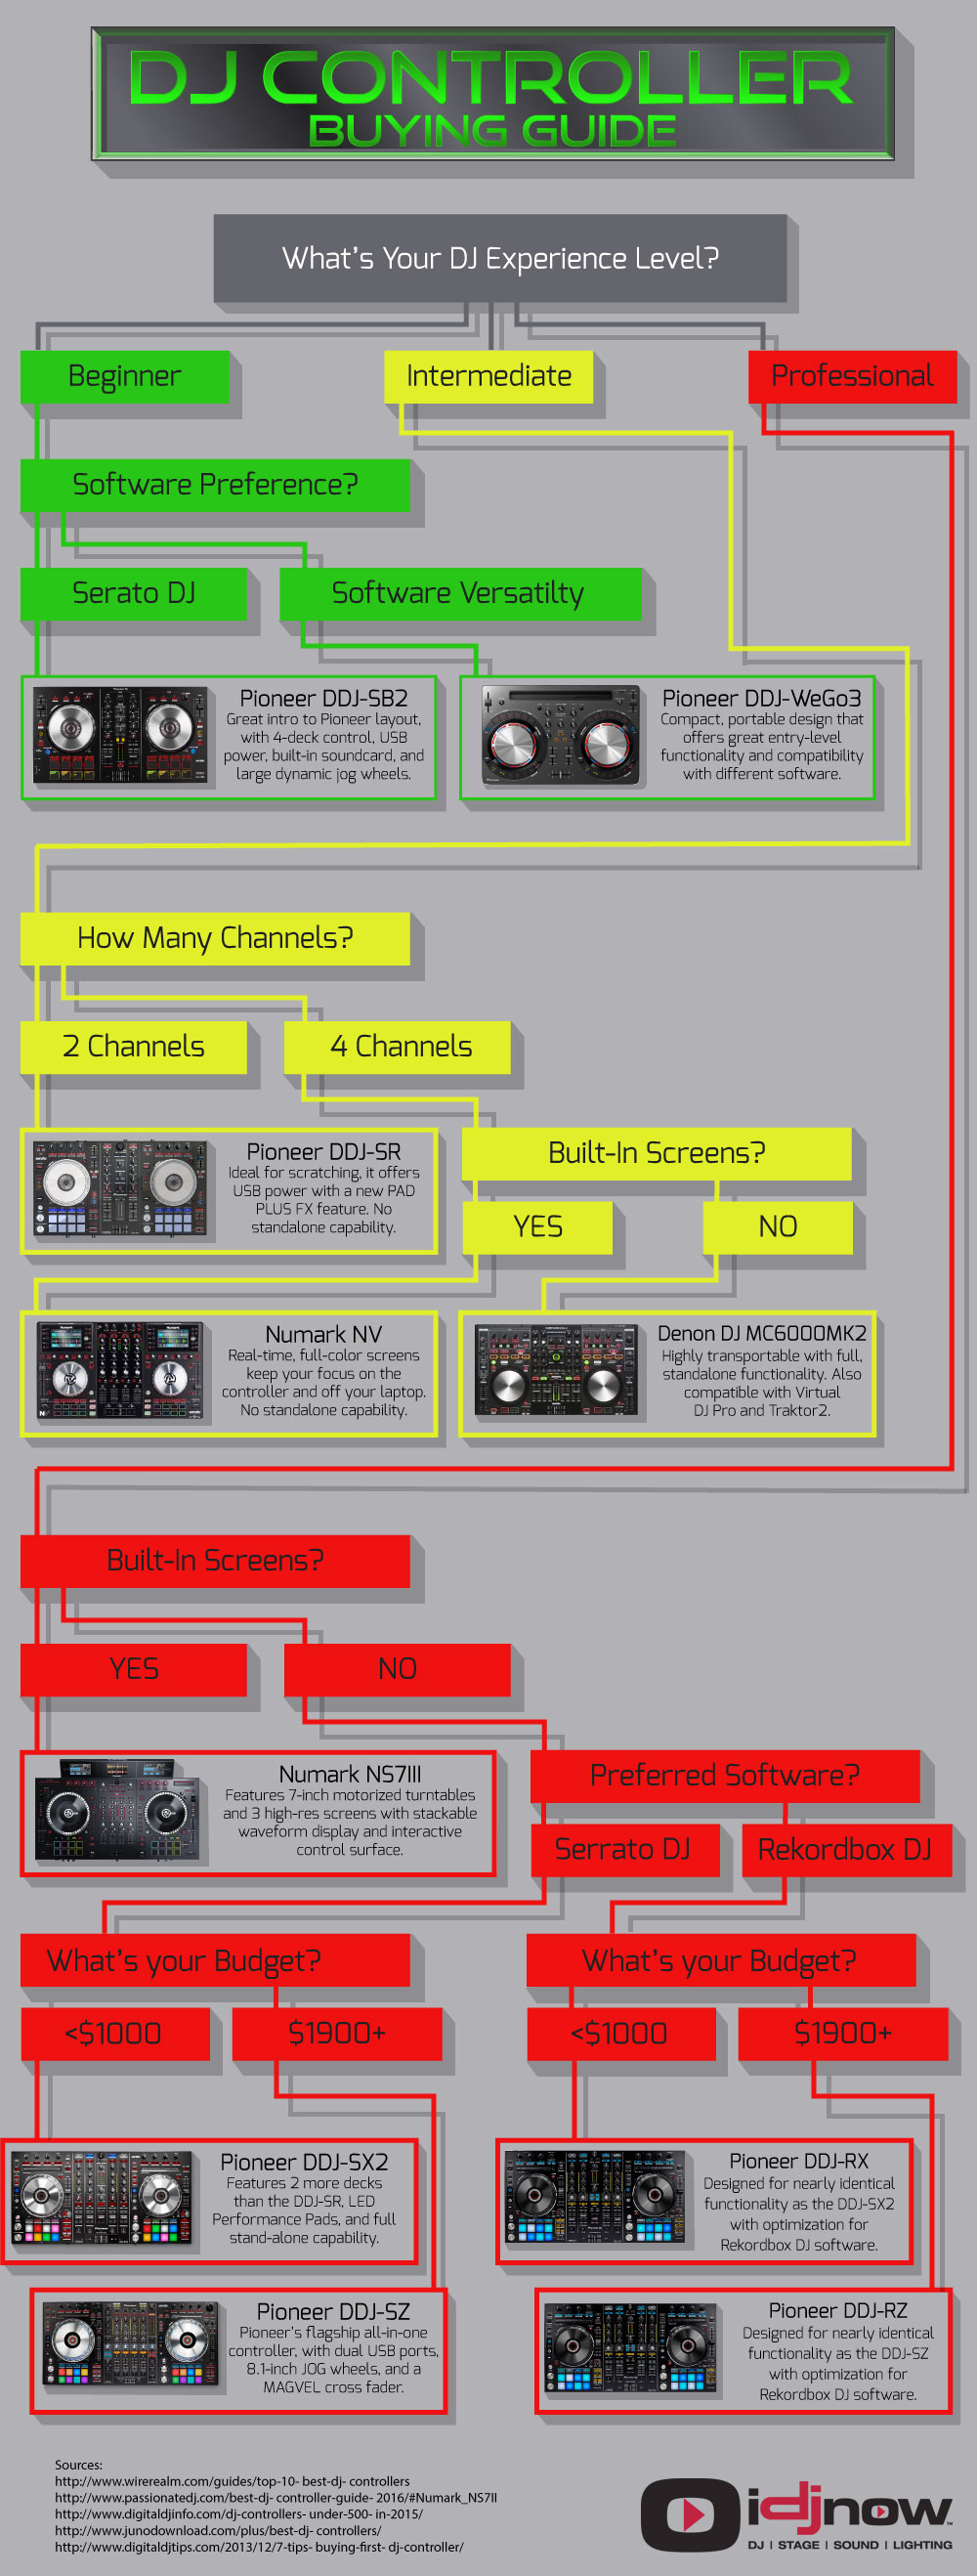 DJ Controller Buying Guide Infographic